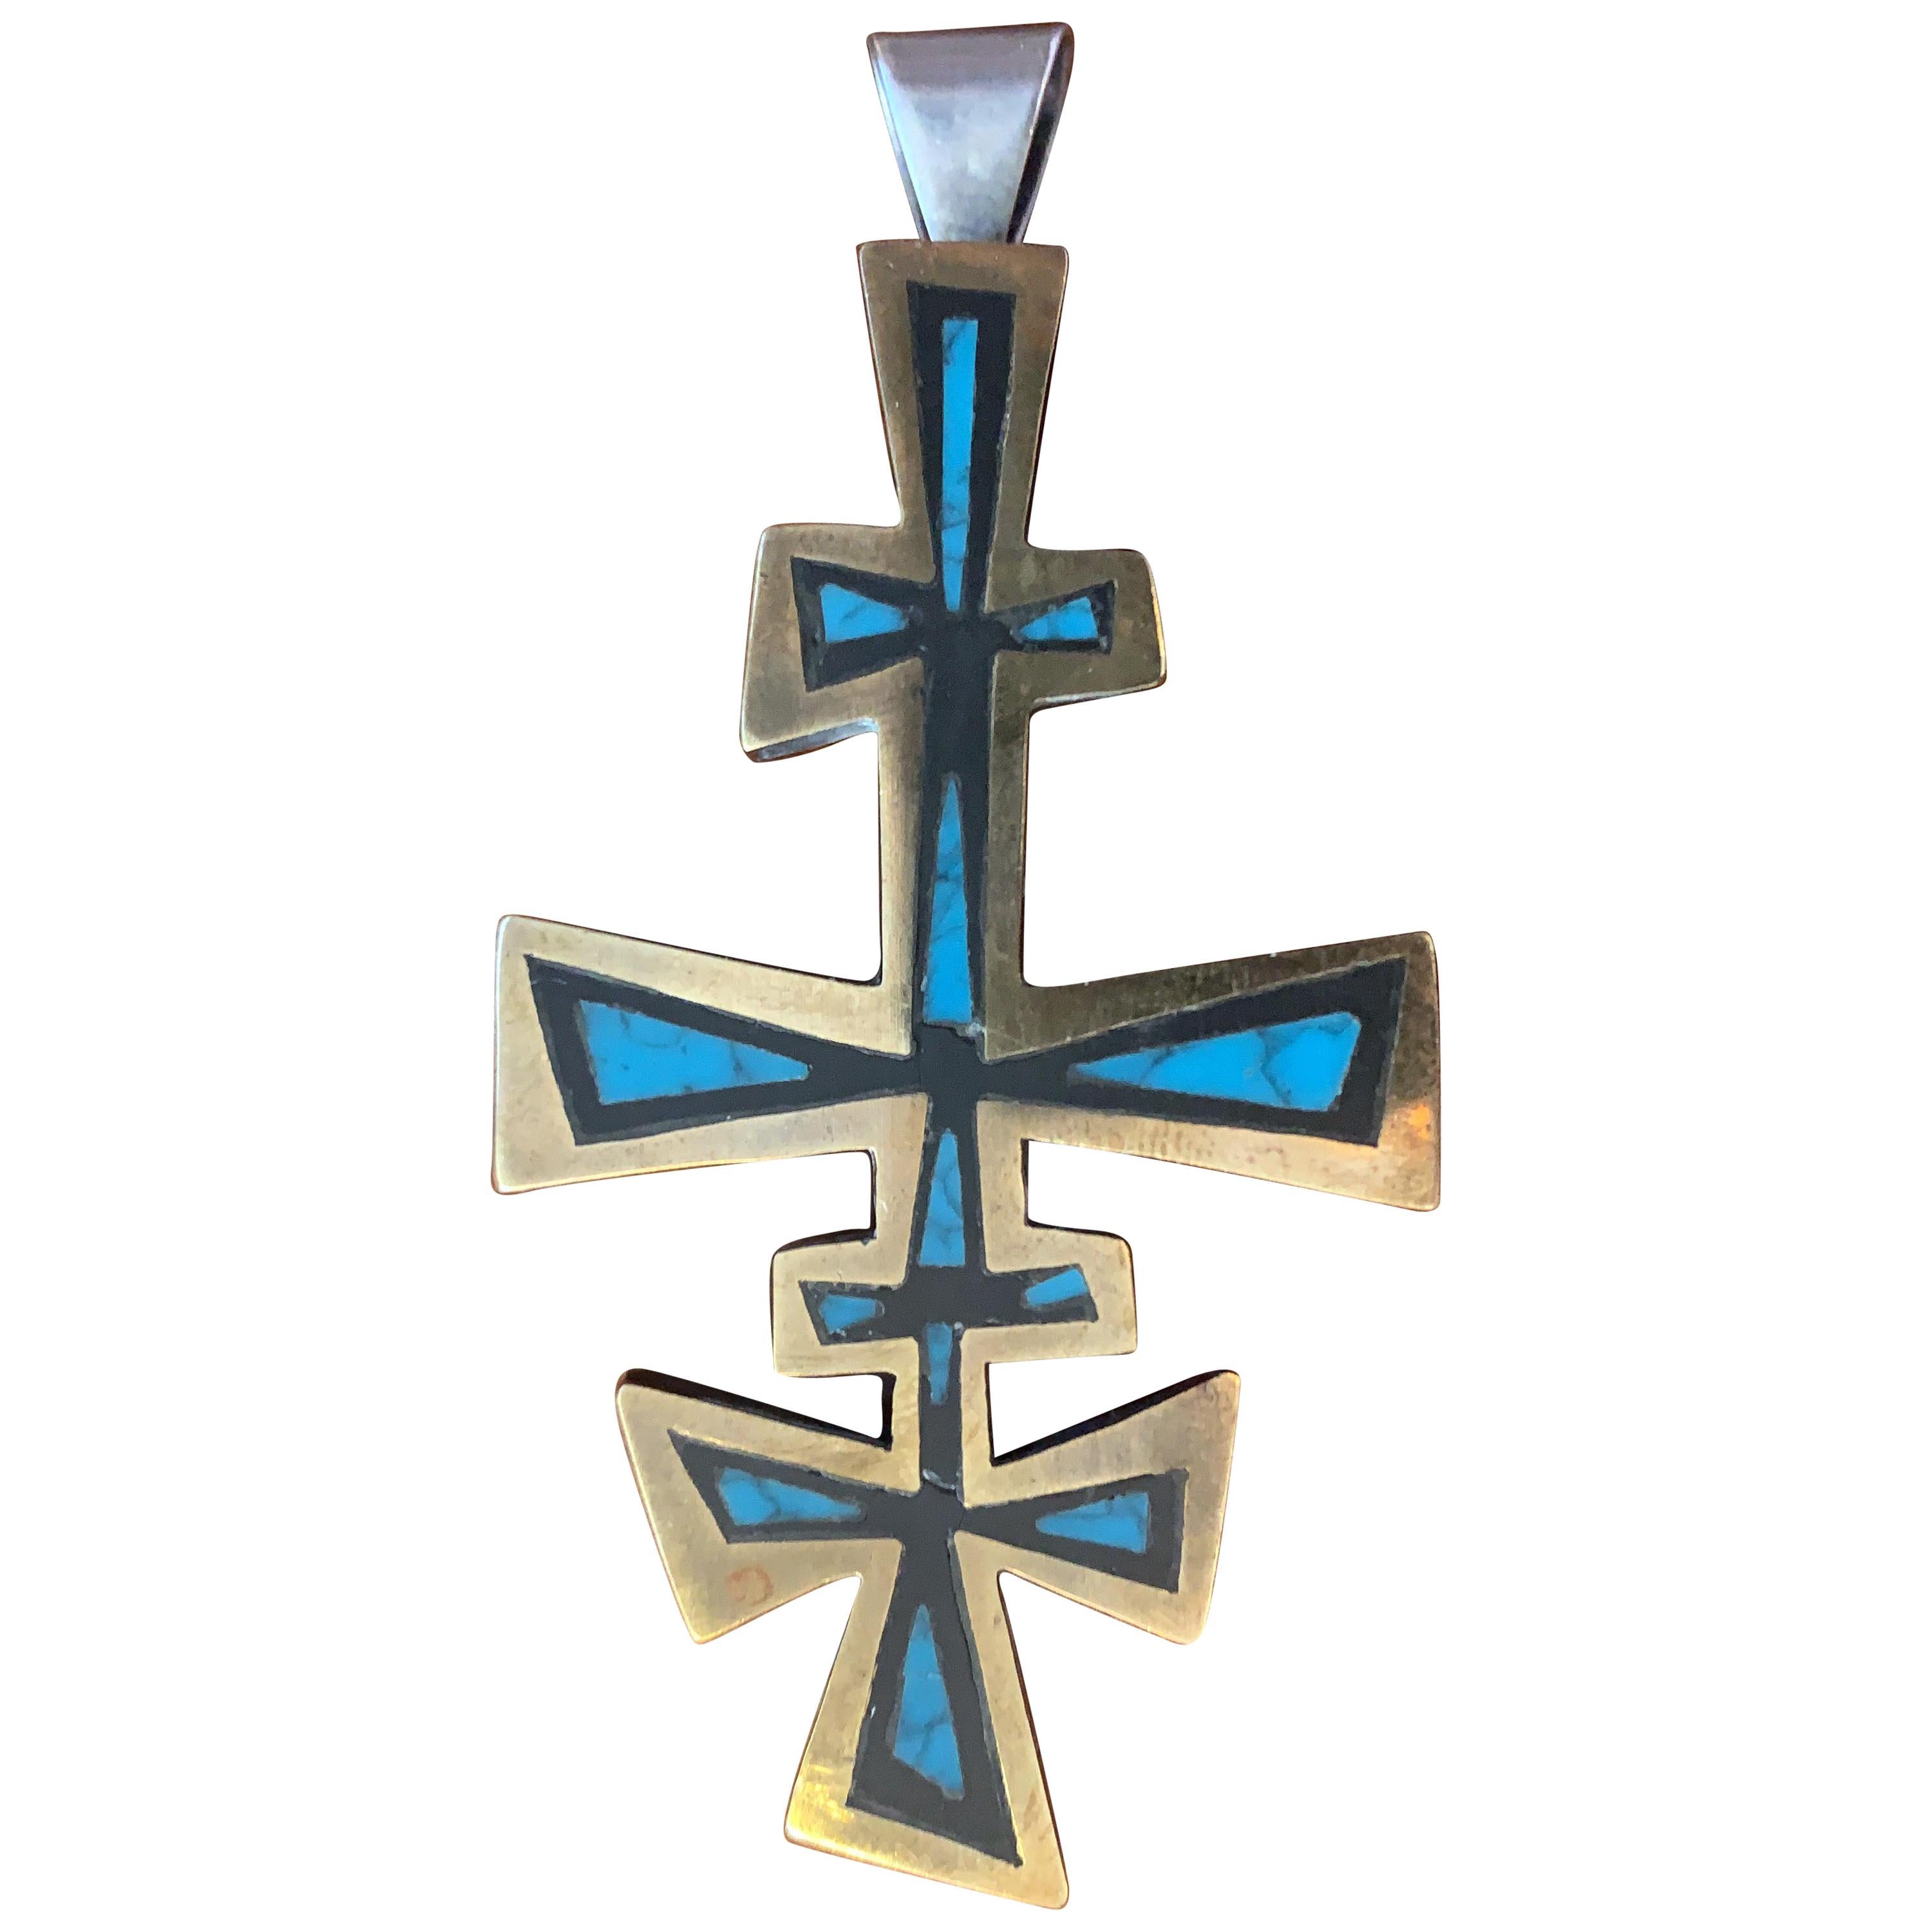 An important Mexican Mid-Century Modern sterling silver, black onyx, brass and chrysocolla pendant cross by Los Castillo. Taxco, Mexico, circa 1960. The pendant resembles a geometrical four-barred cross with brass edge, onyx body and chrysocolla